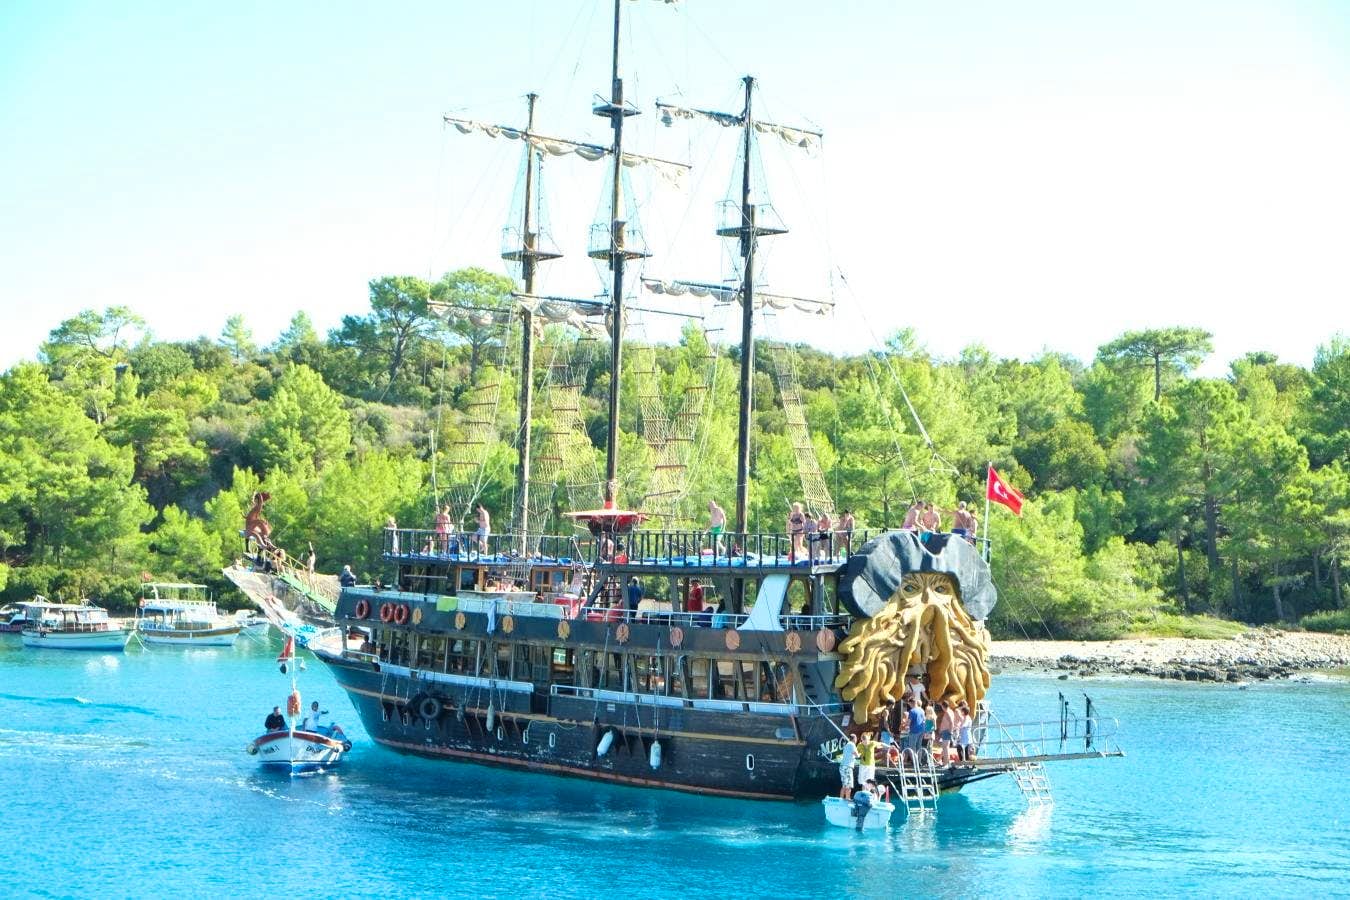 KEMER PIRATE BOAT TOUR WITH SHARED TRANSFERS